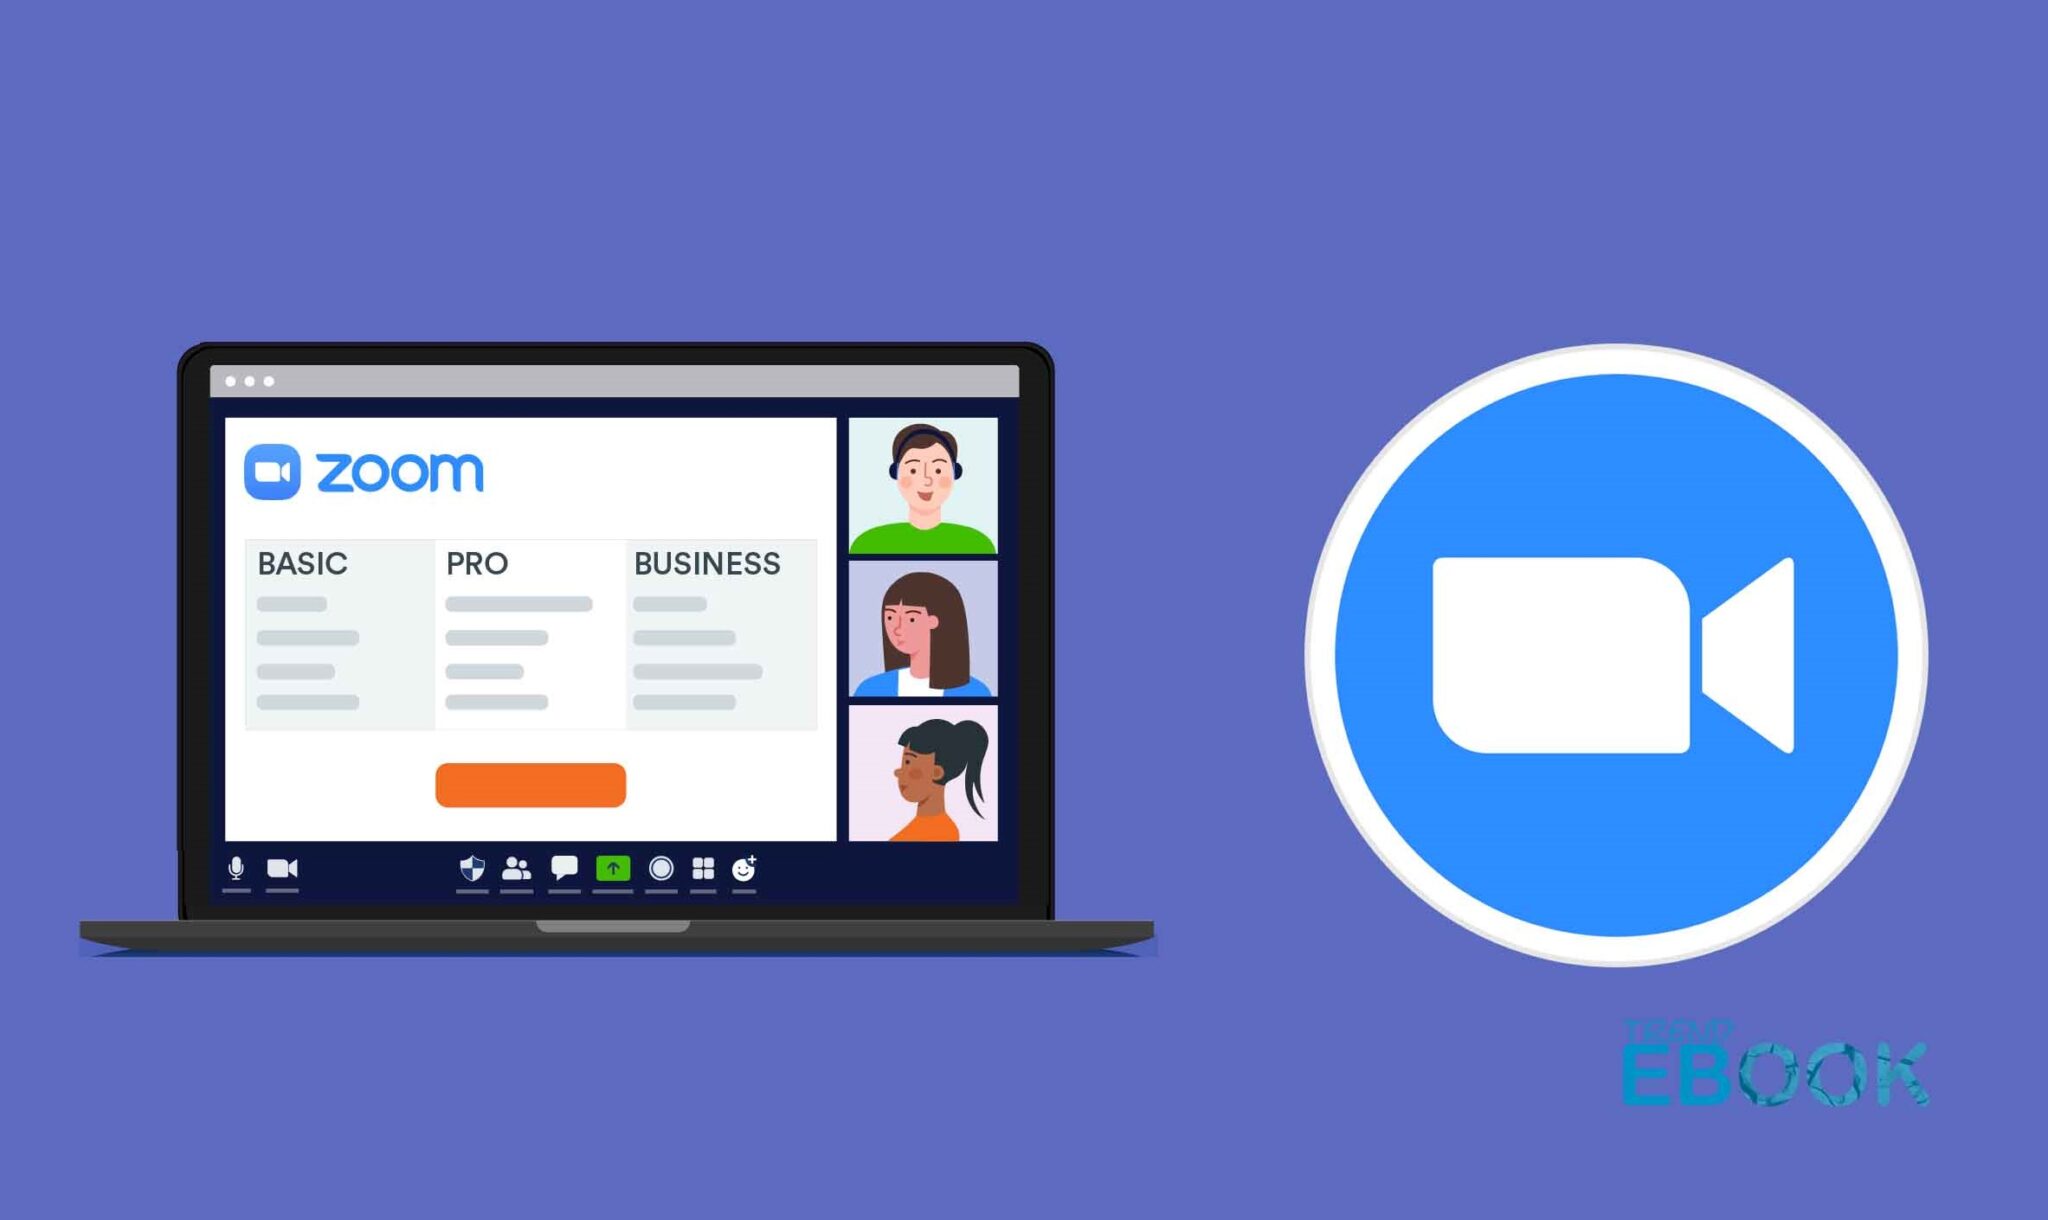 Zoom Pricing - How to Access The Zoom Meetings